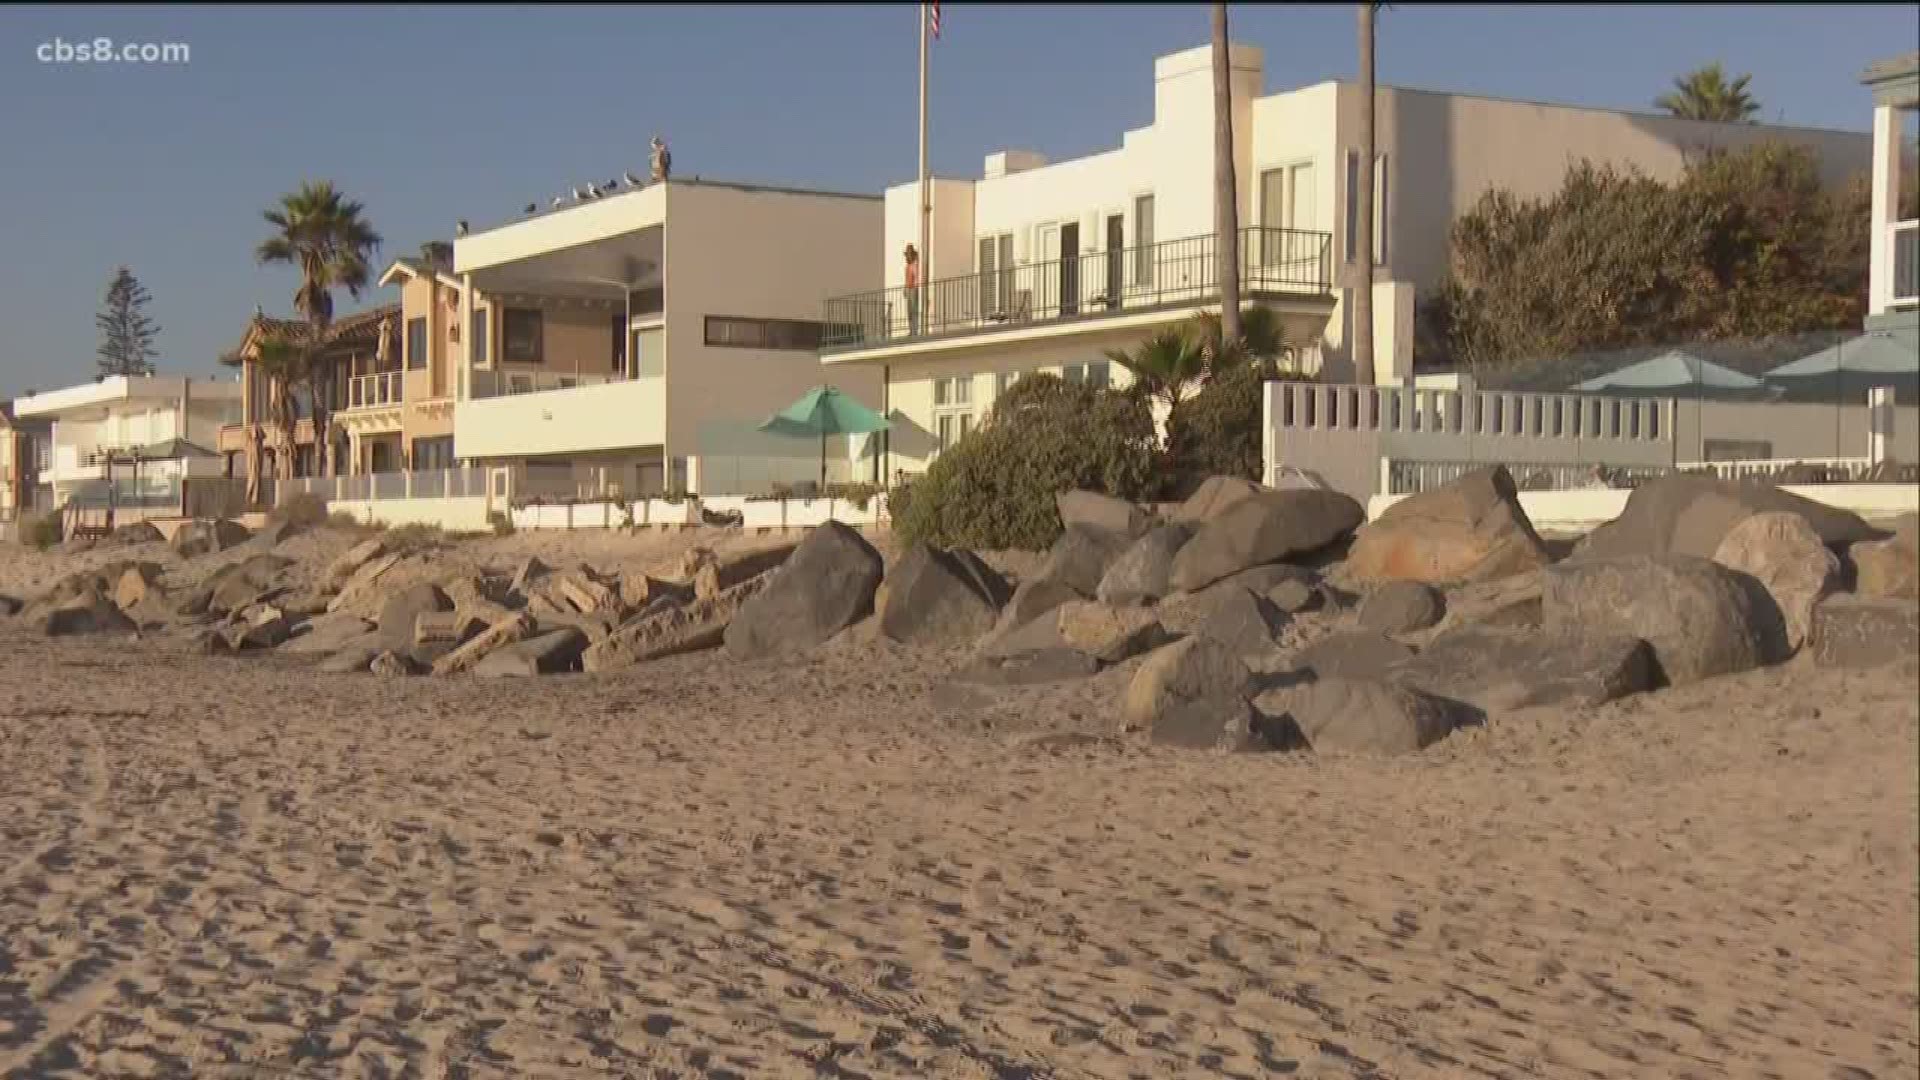 The Coastal Commission has proposed a strategy known as “managed retreat” but some Del Mar residents say the plan is unacceptable.